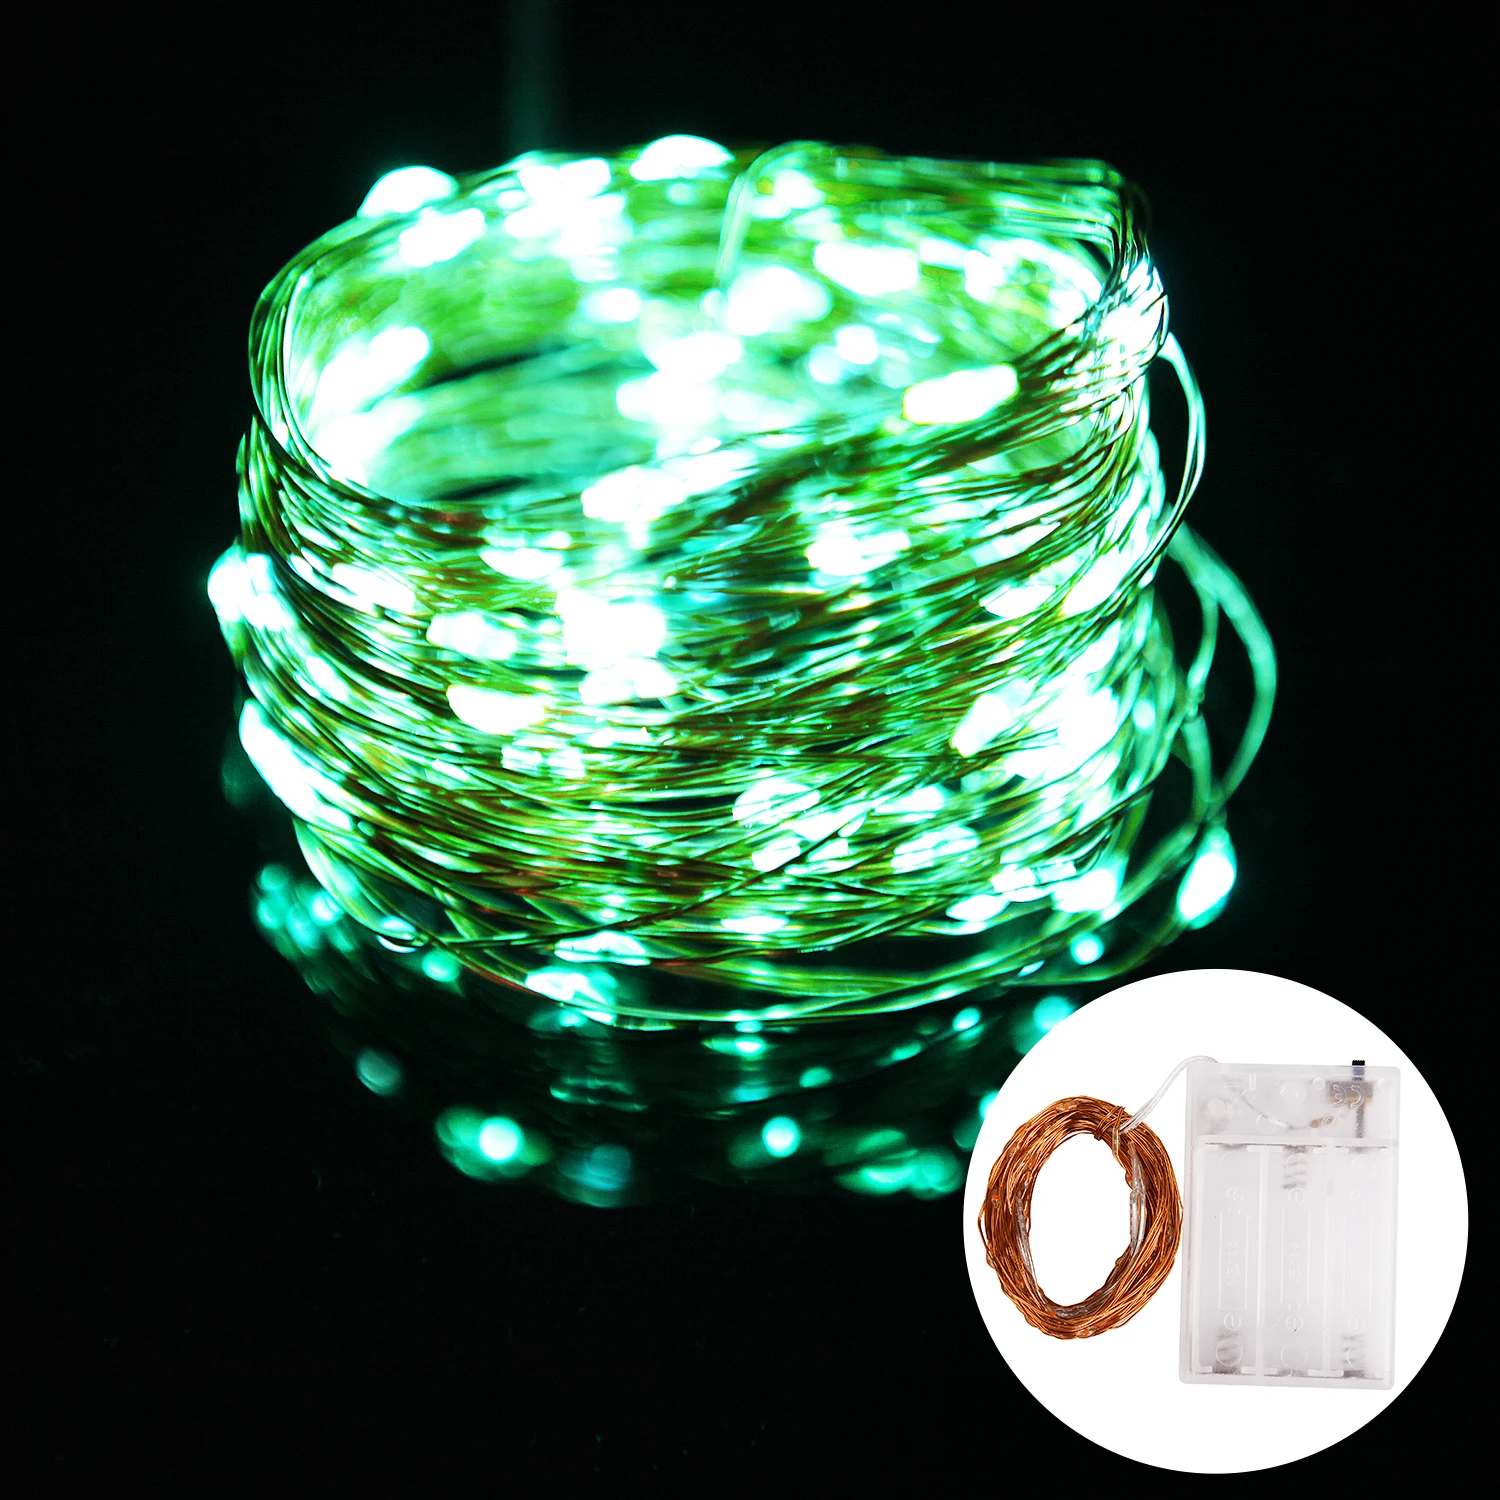 D copper wire fairy string light 20 30 50 100 led battery powered waterproof for garden thumb200